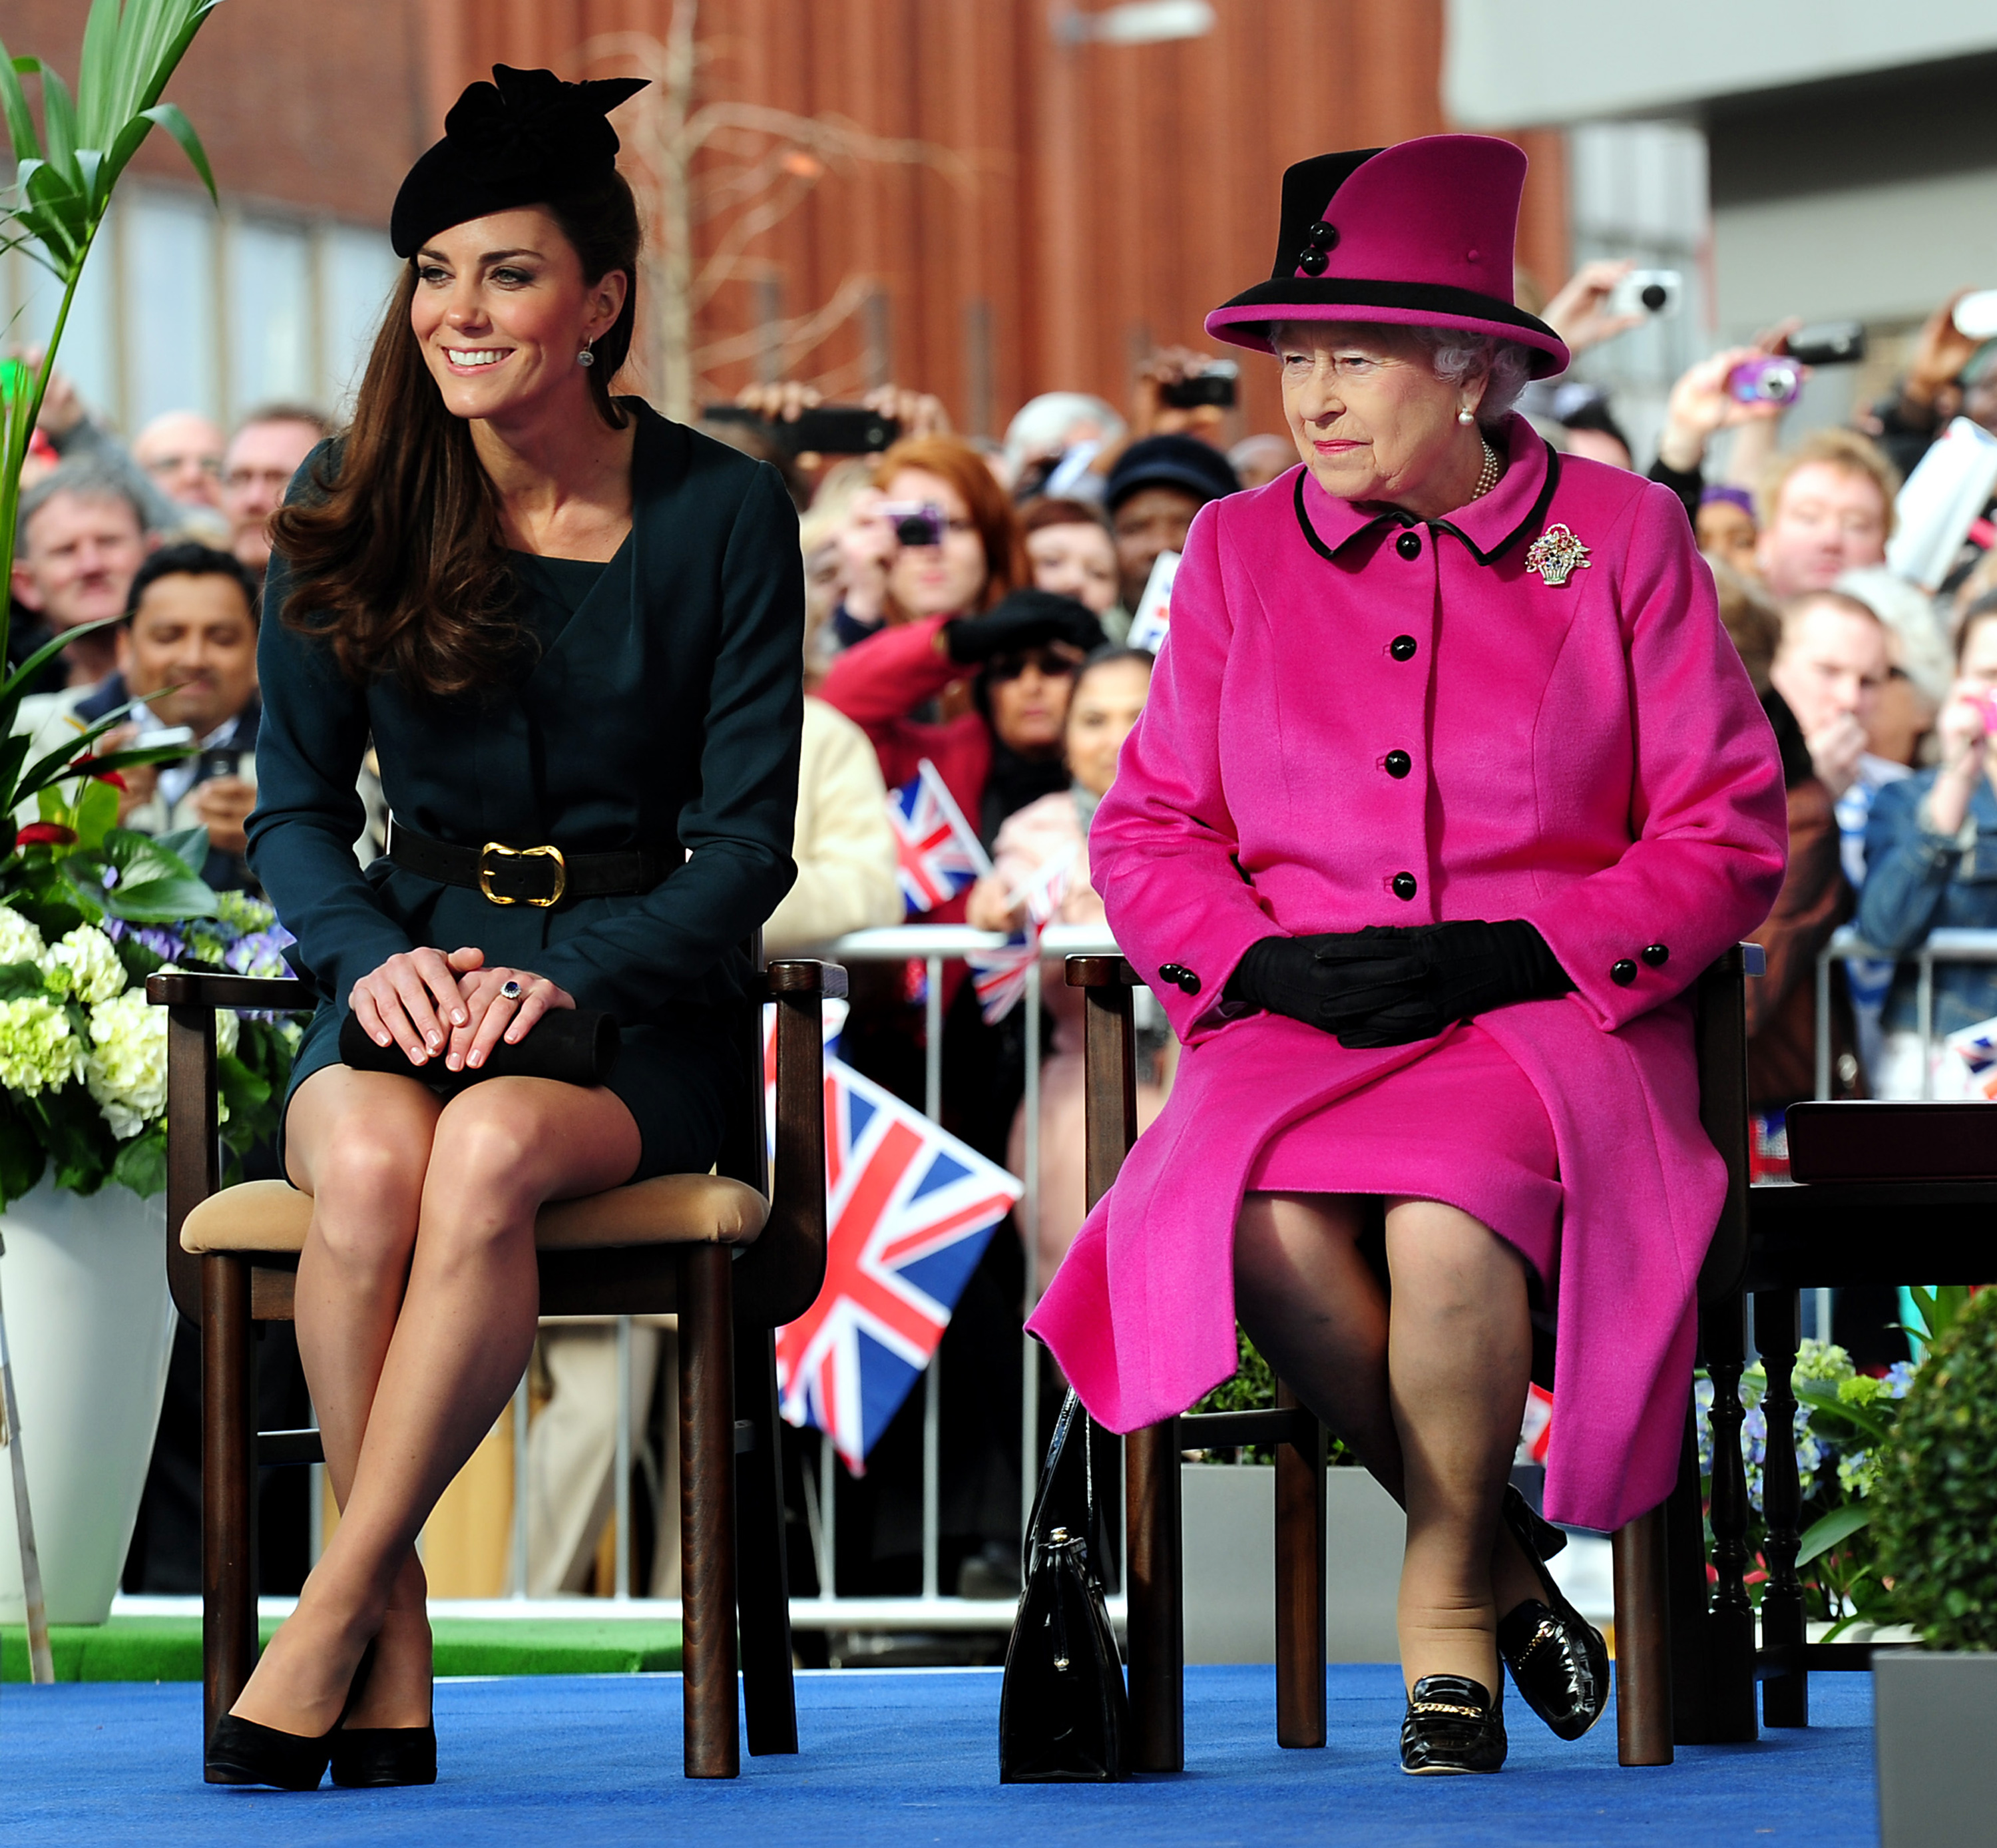 <p><a href="https://www.wonderwall.com/celebrity/profiles/overview/duchess-kate-1356.article">Duchess Kate</a> sat alongside Queen Elizabeth II during a visit to the city of Leicester in central England on March 8, 2012, as the monarch began her Diamond Jubilee tour of Britain to celebrate 60 years on the throne.</p>